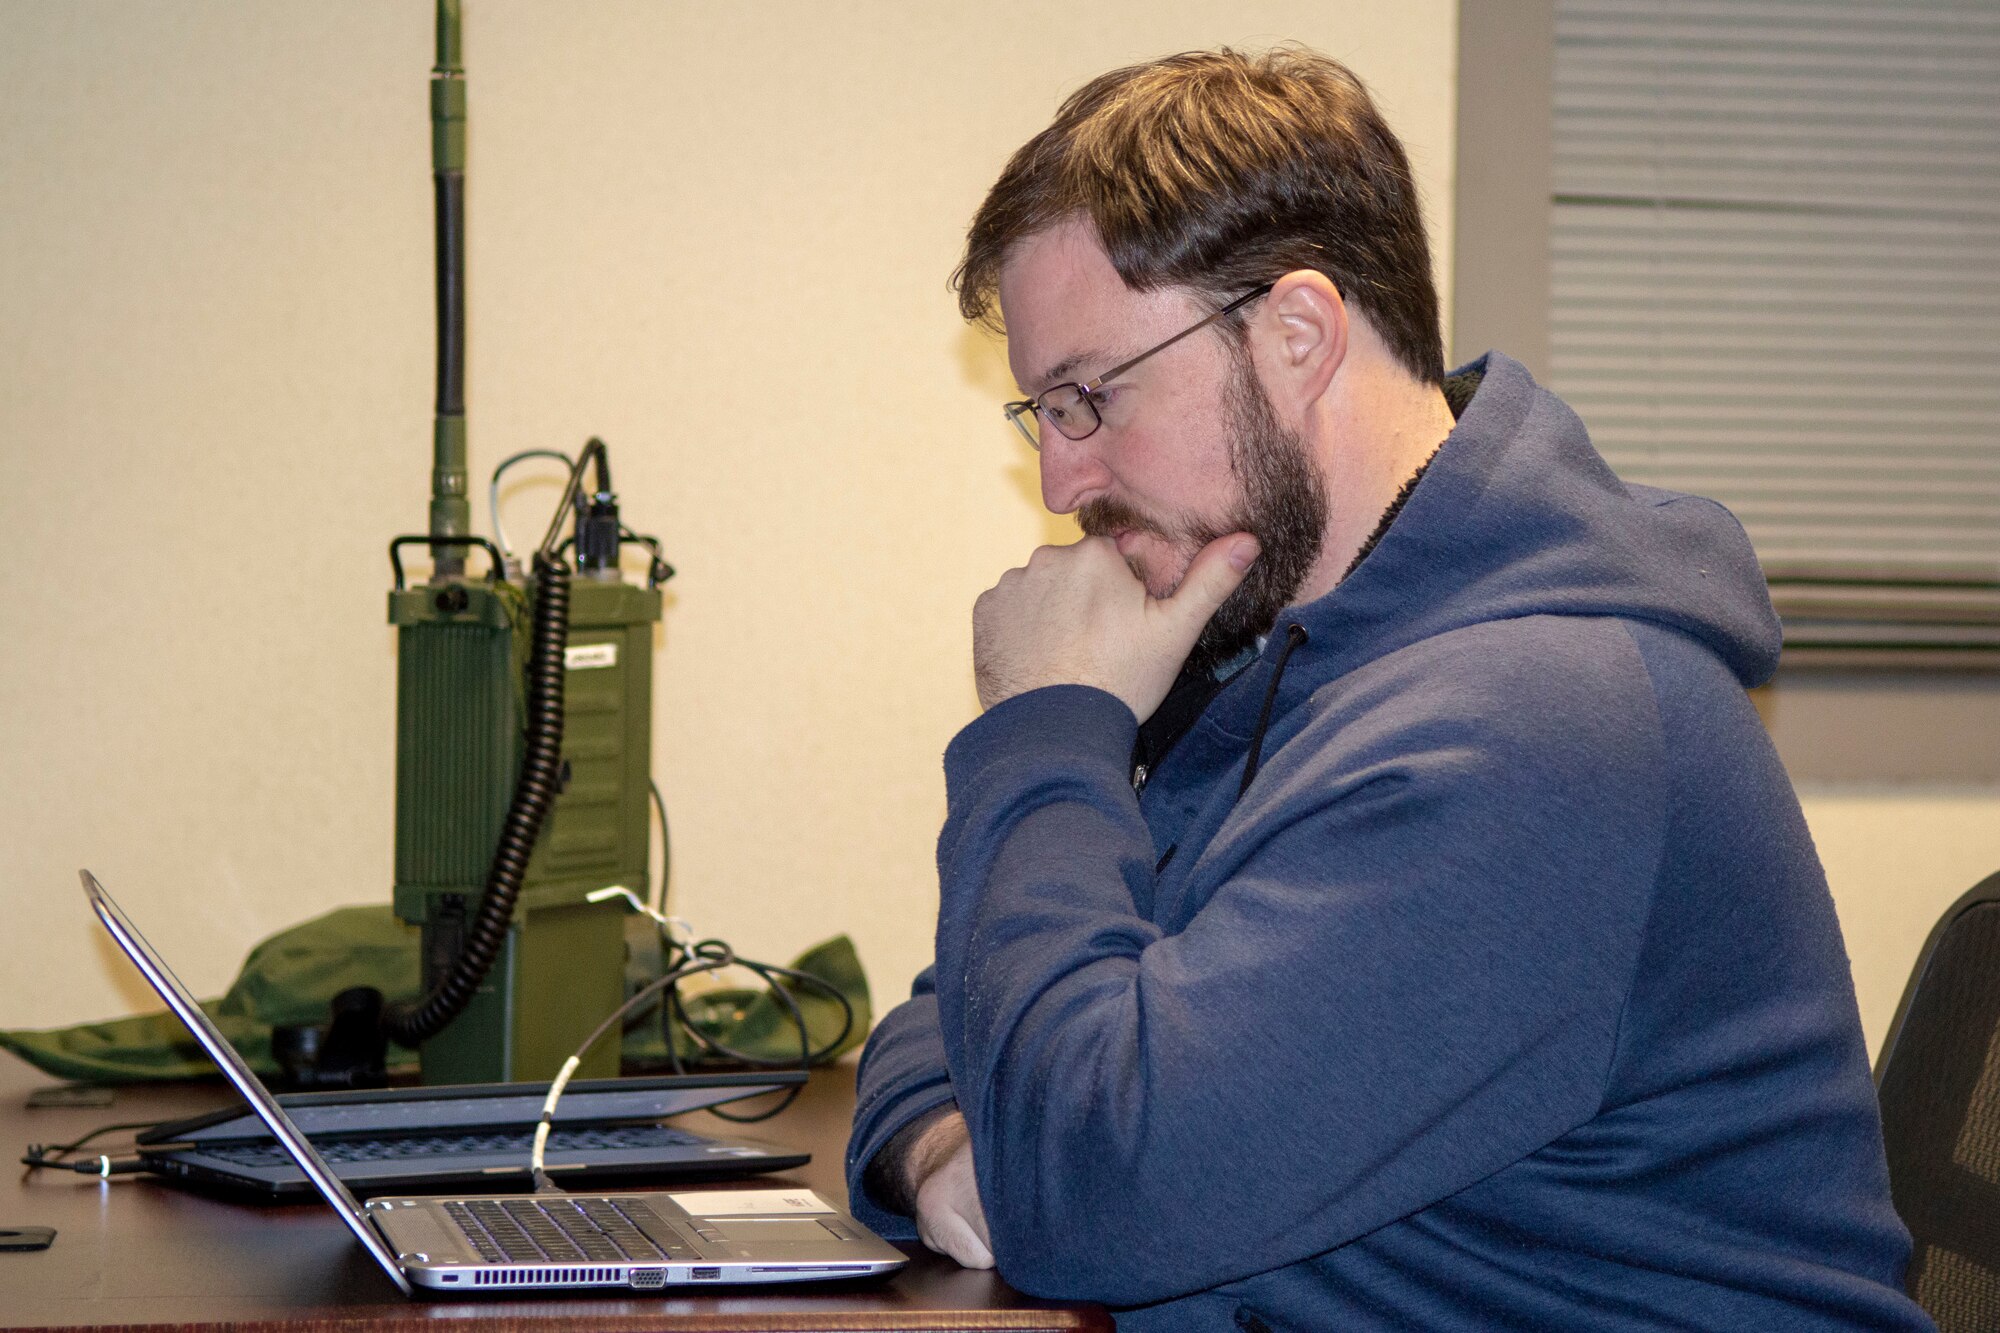 Man sitting in front of laptop with tactical radio on table.